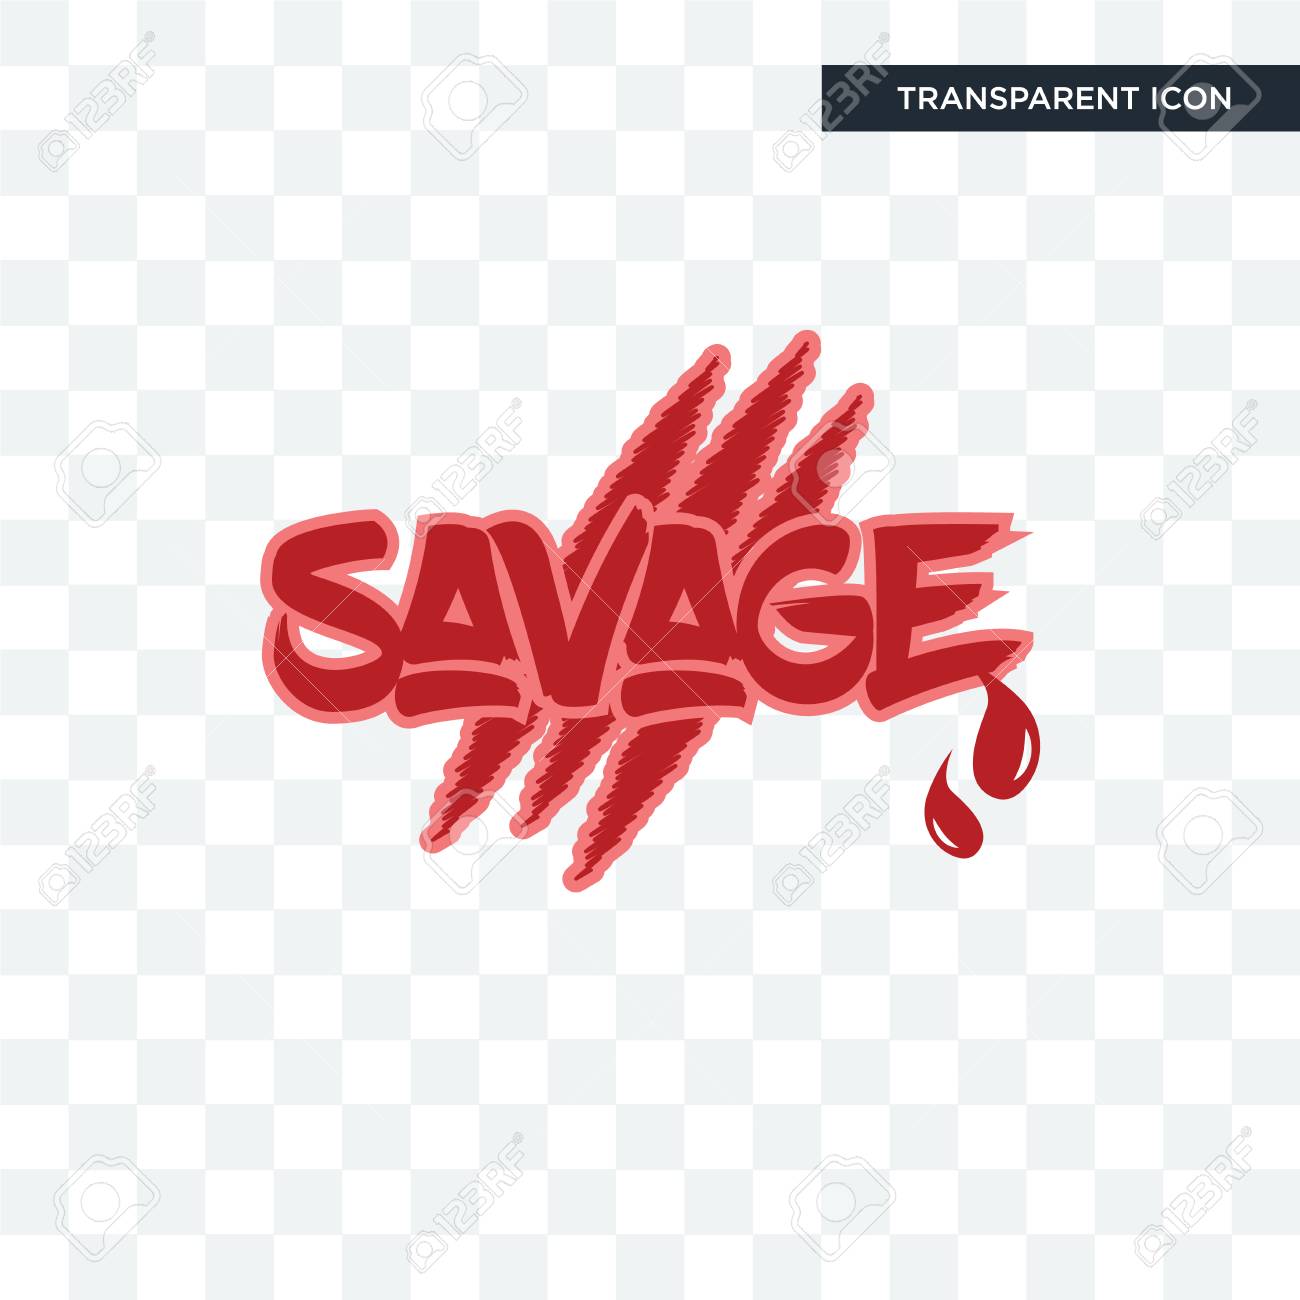 Savage Vector Icon Isolated On Transparent Background